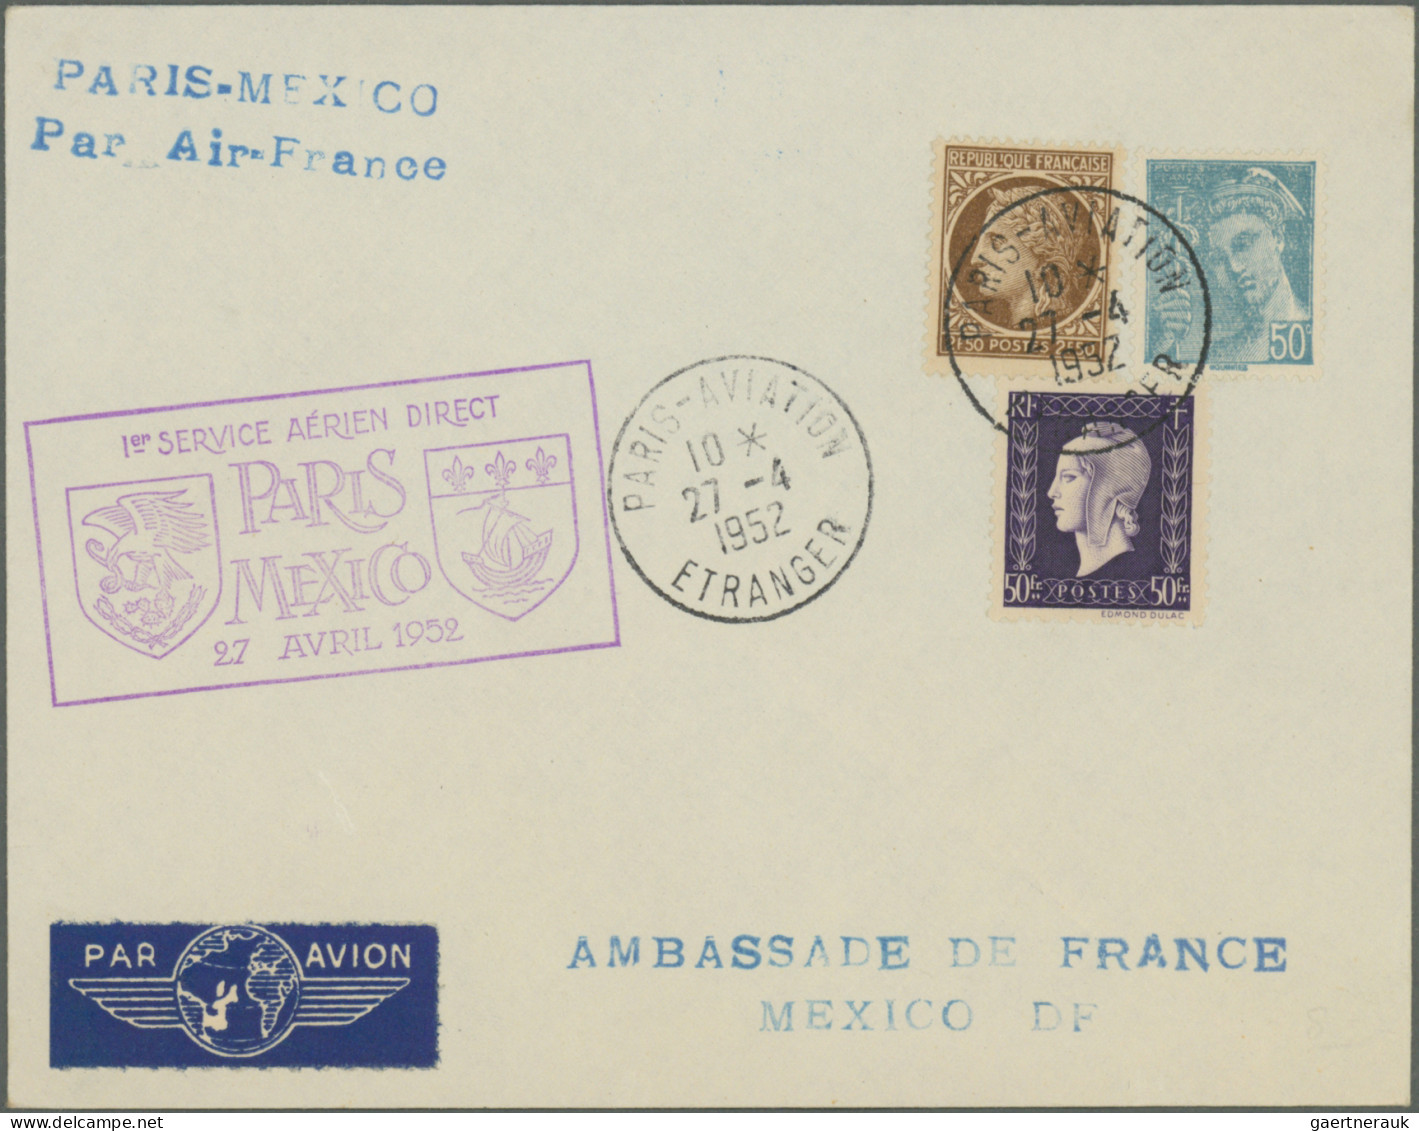 Airmail - Europe: 1947/1988, France/area-related airmail, collection of apprx. 1